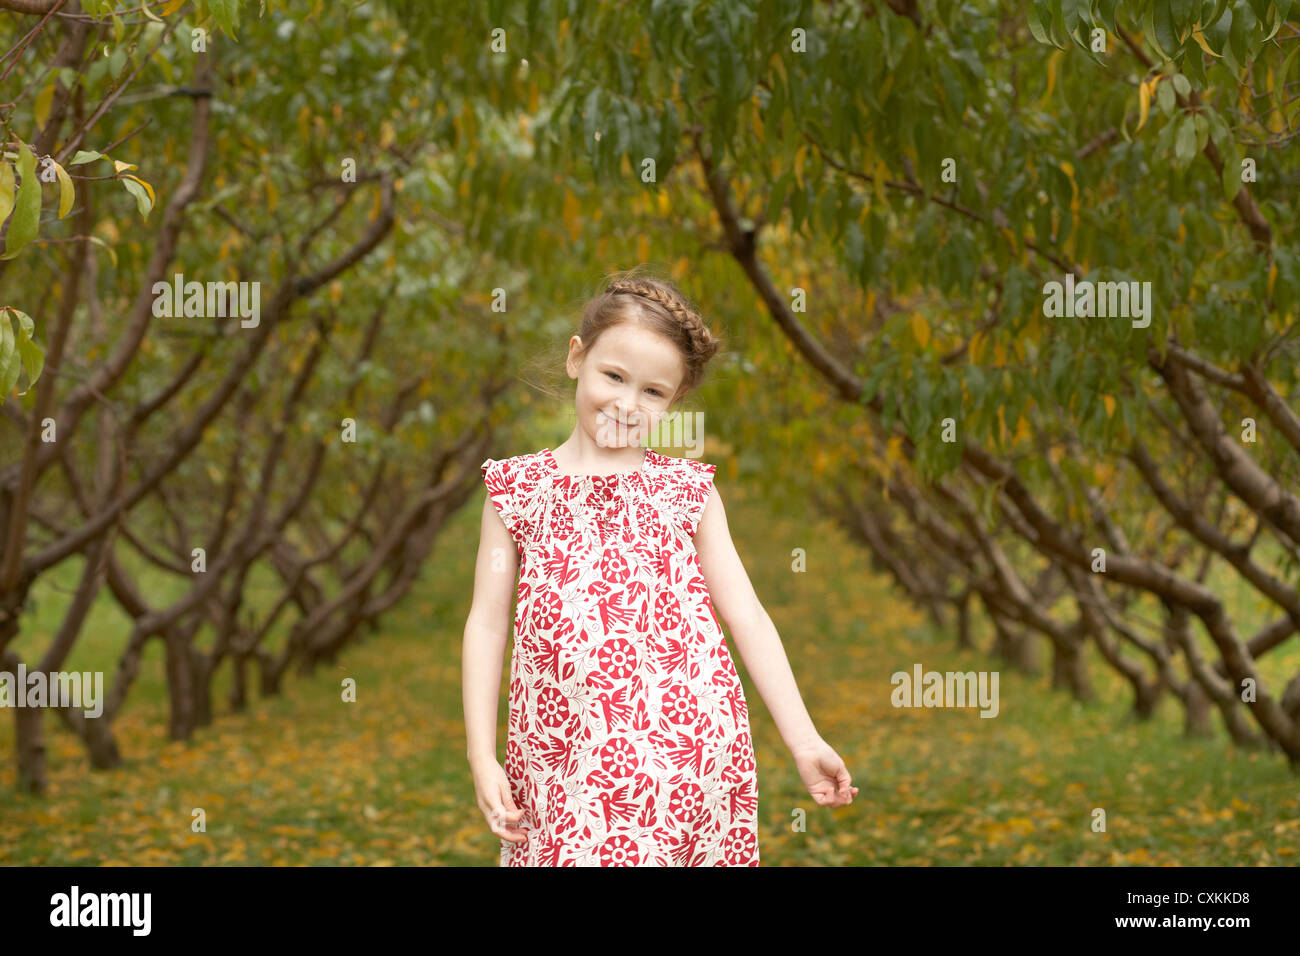 girl dancing by the peach trees Stock Photo